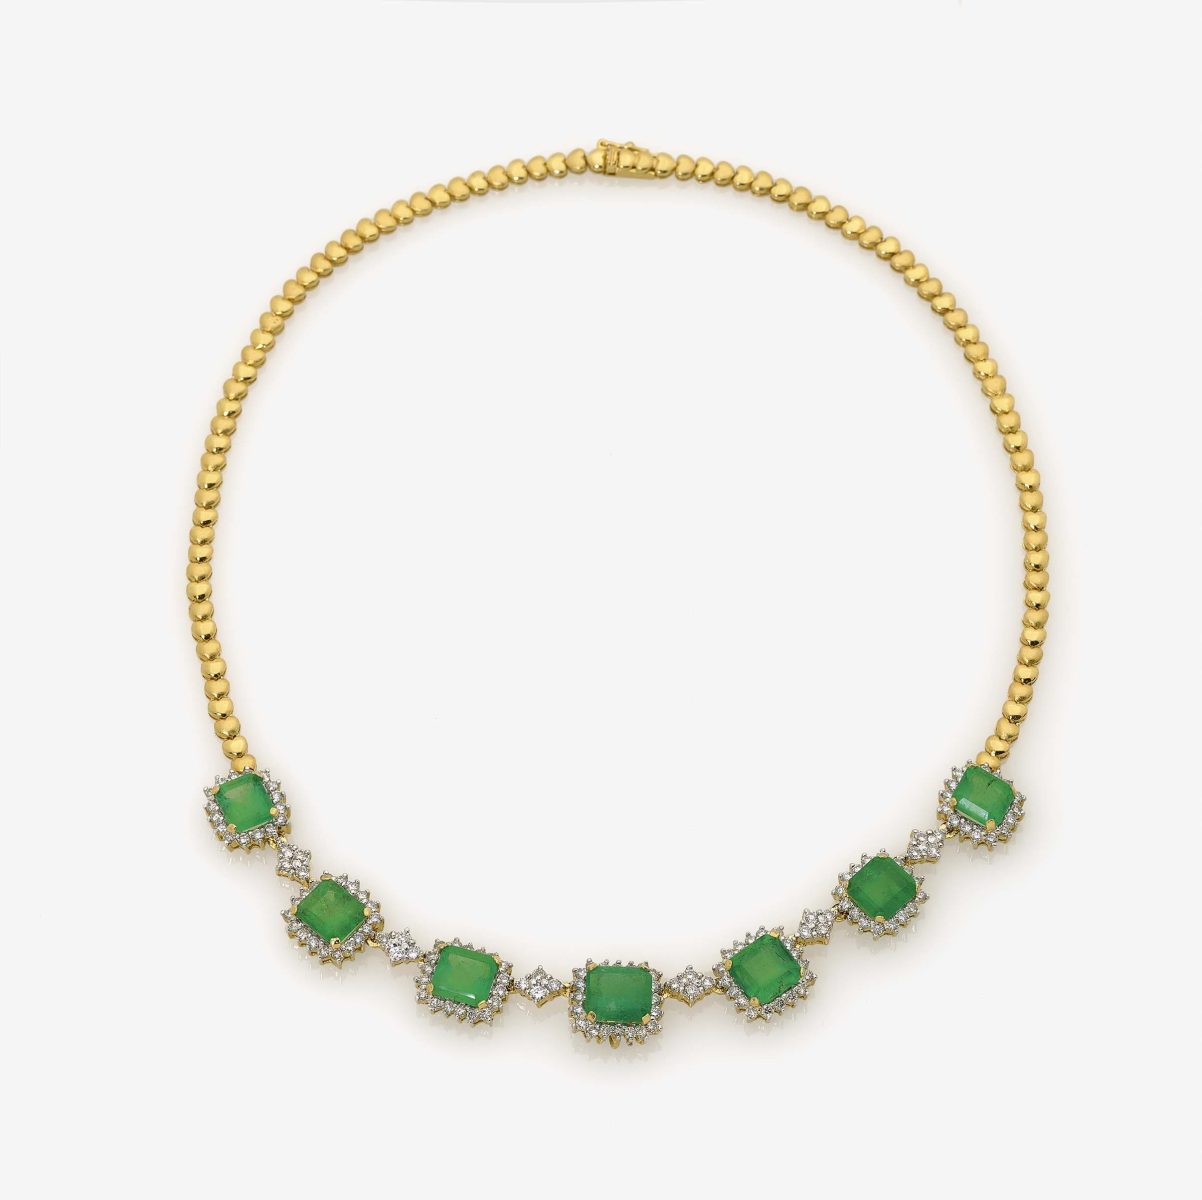 An Emerald and Diamond Necklace18K yellow gold (750/-), tested. Circa 146 brilliant-cut diamonds, - Image 2 of 2